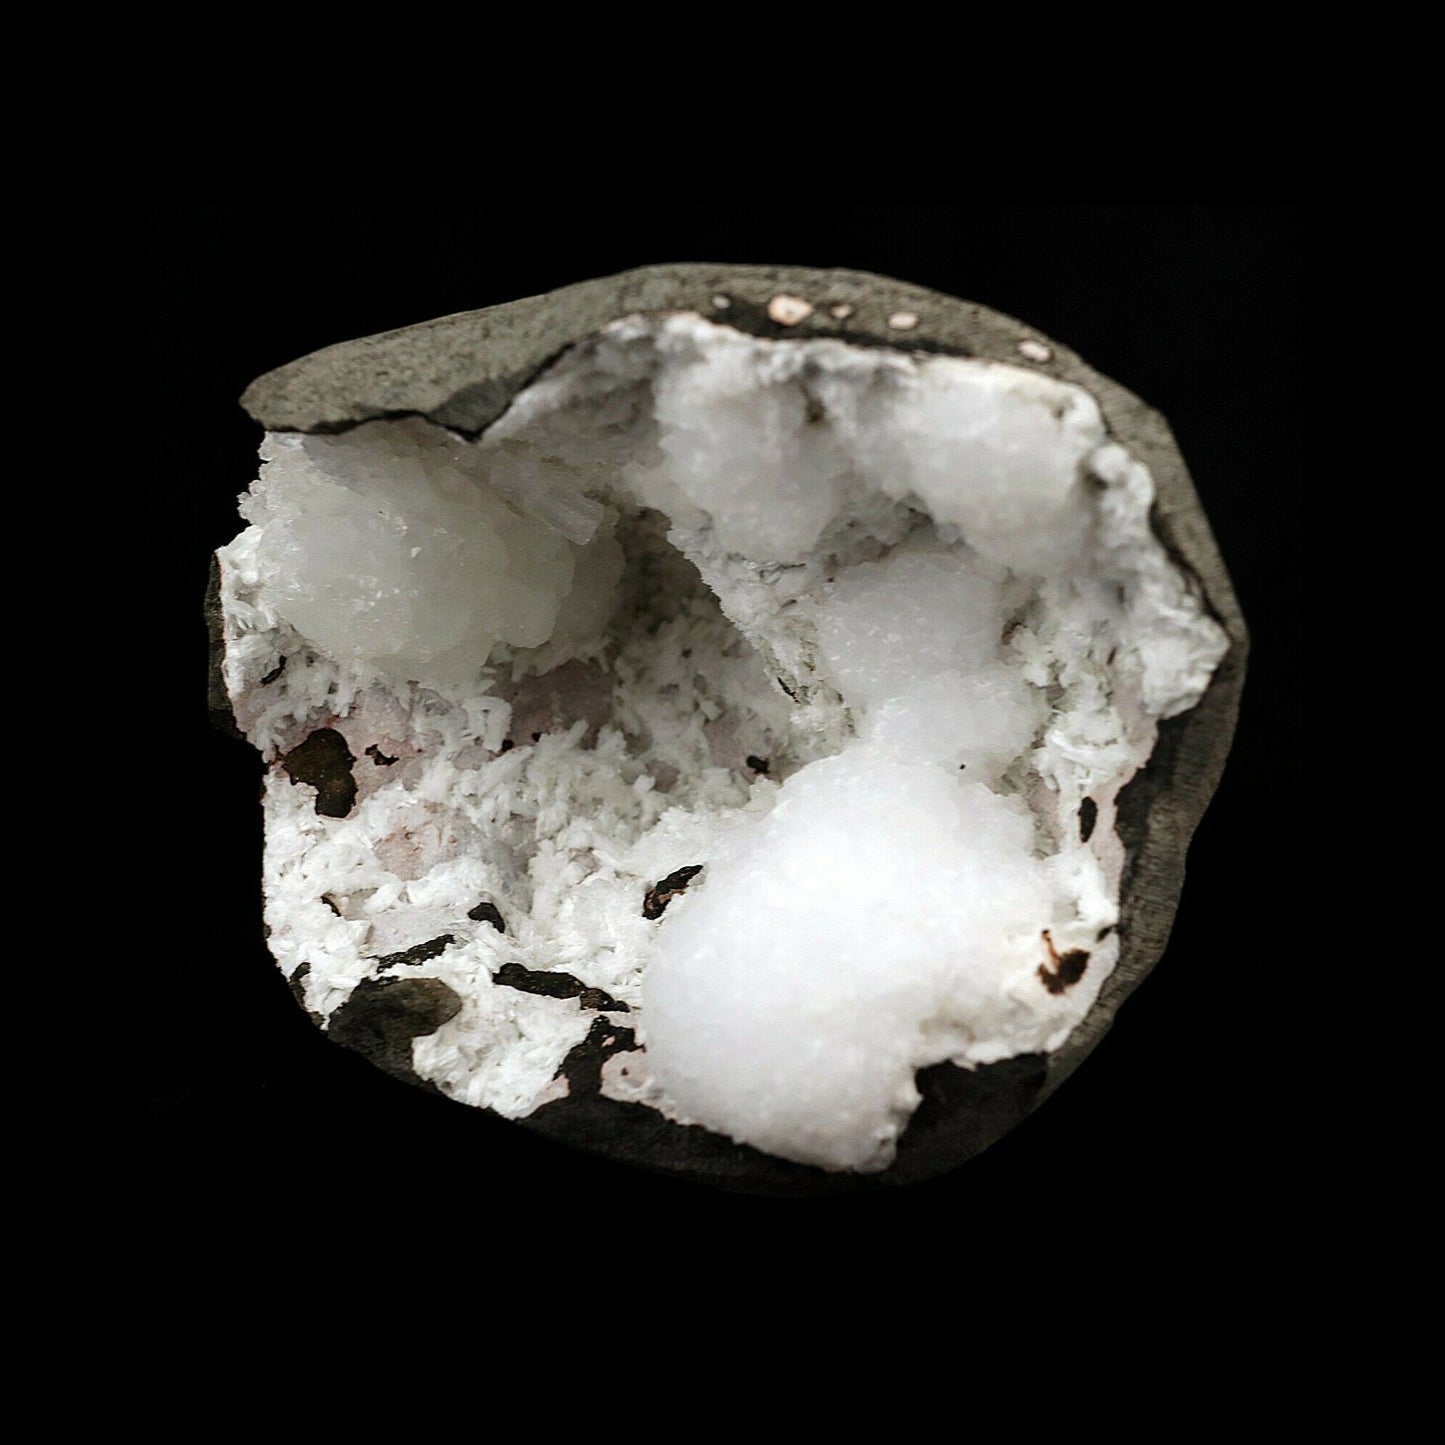 Goosecreekite Rare Mineral in Semi Geod Natural Mineral Specimen # B3612  https://www.superbminerals.us/products/goosecreekite-rare-mineral-in-semi-geod-natural-mineral-specimen-b-3612  Features:Very fine specimen of the very rare zeolite mineral goosecreekite. The goosecreekite has grown in a translucent white nodular formation of goosecreekite in polycrystalline aggregates,The crystals on this beauty are sharp with white coloring and vitreous luster. The goosecreekite sits inside a basalt geode